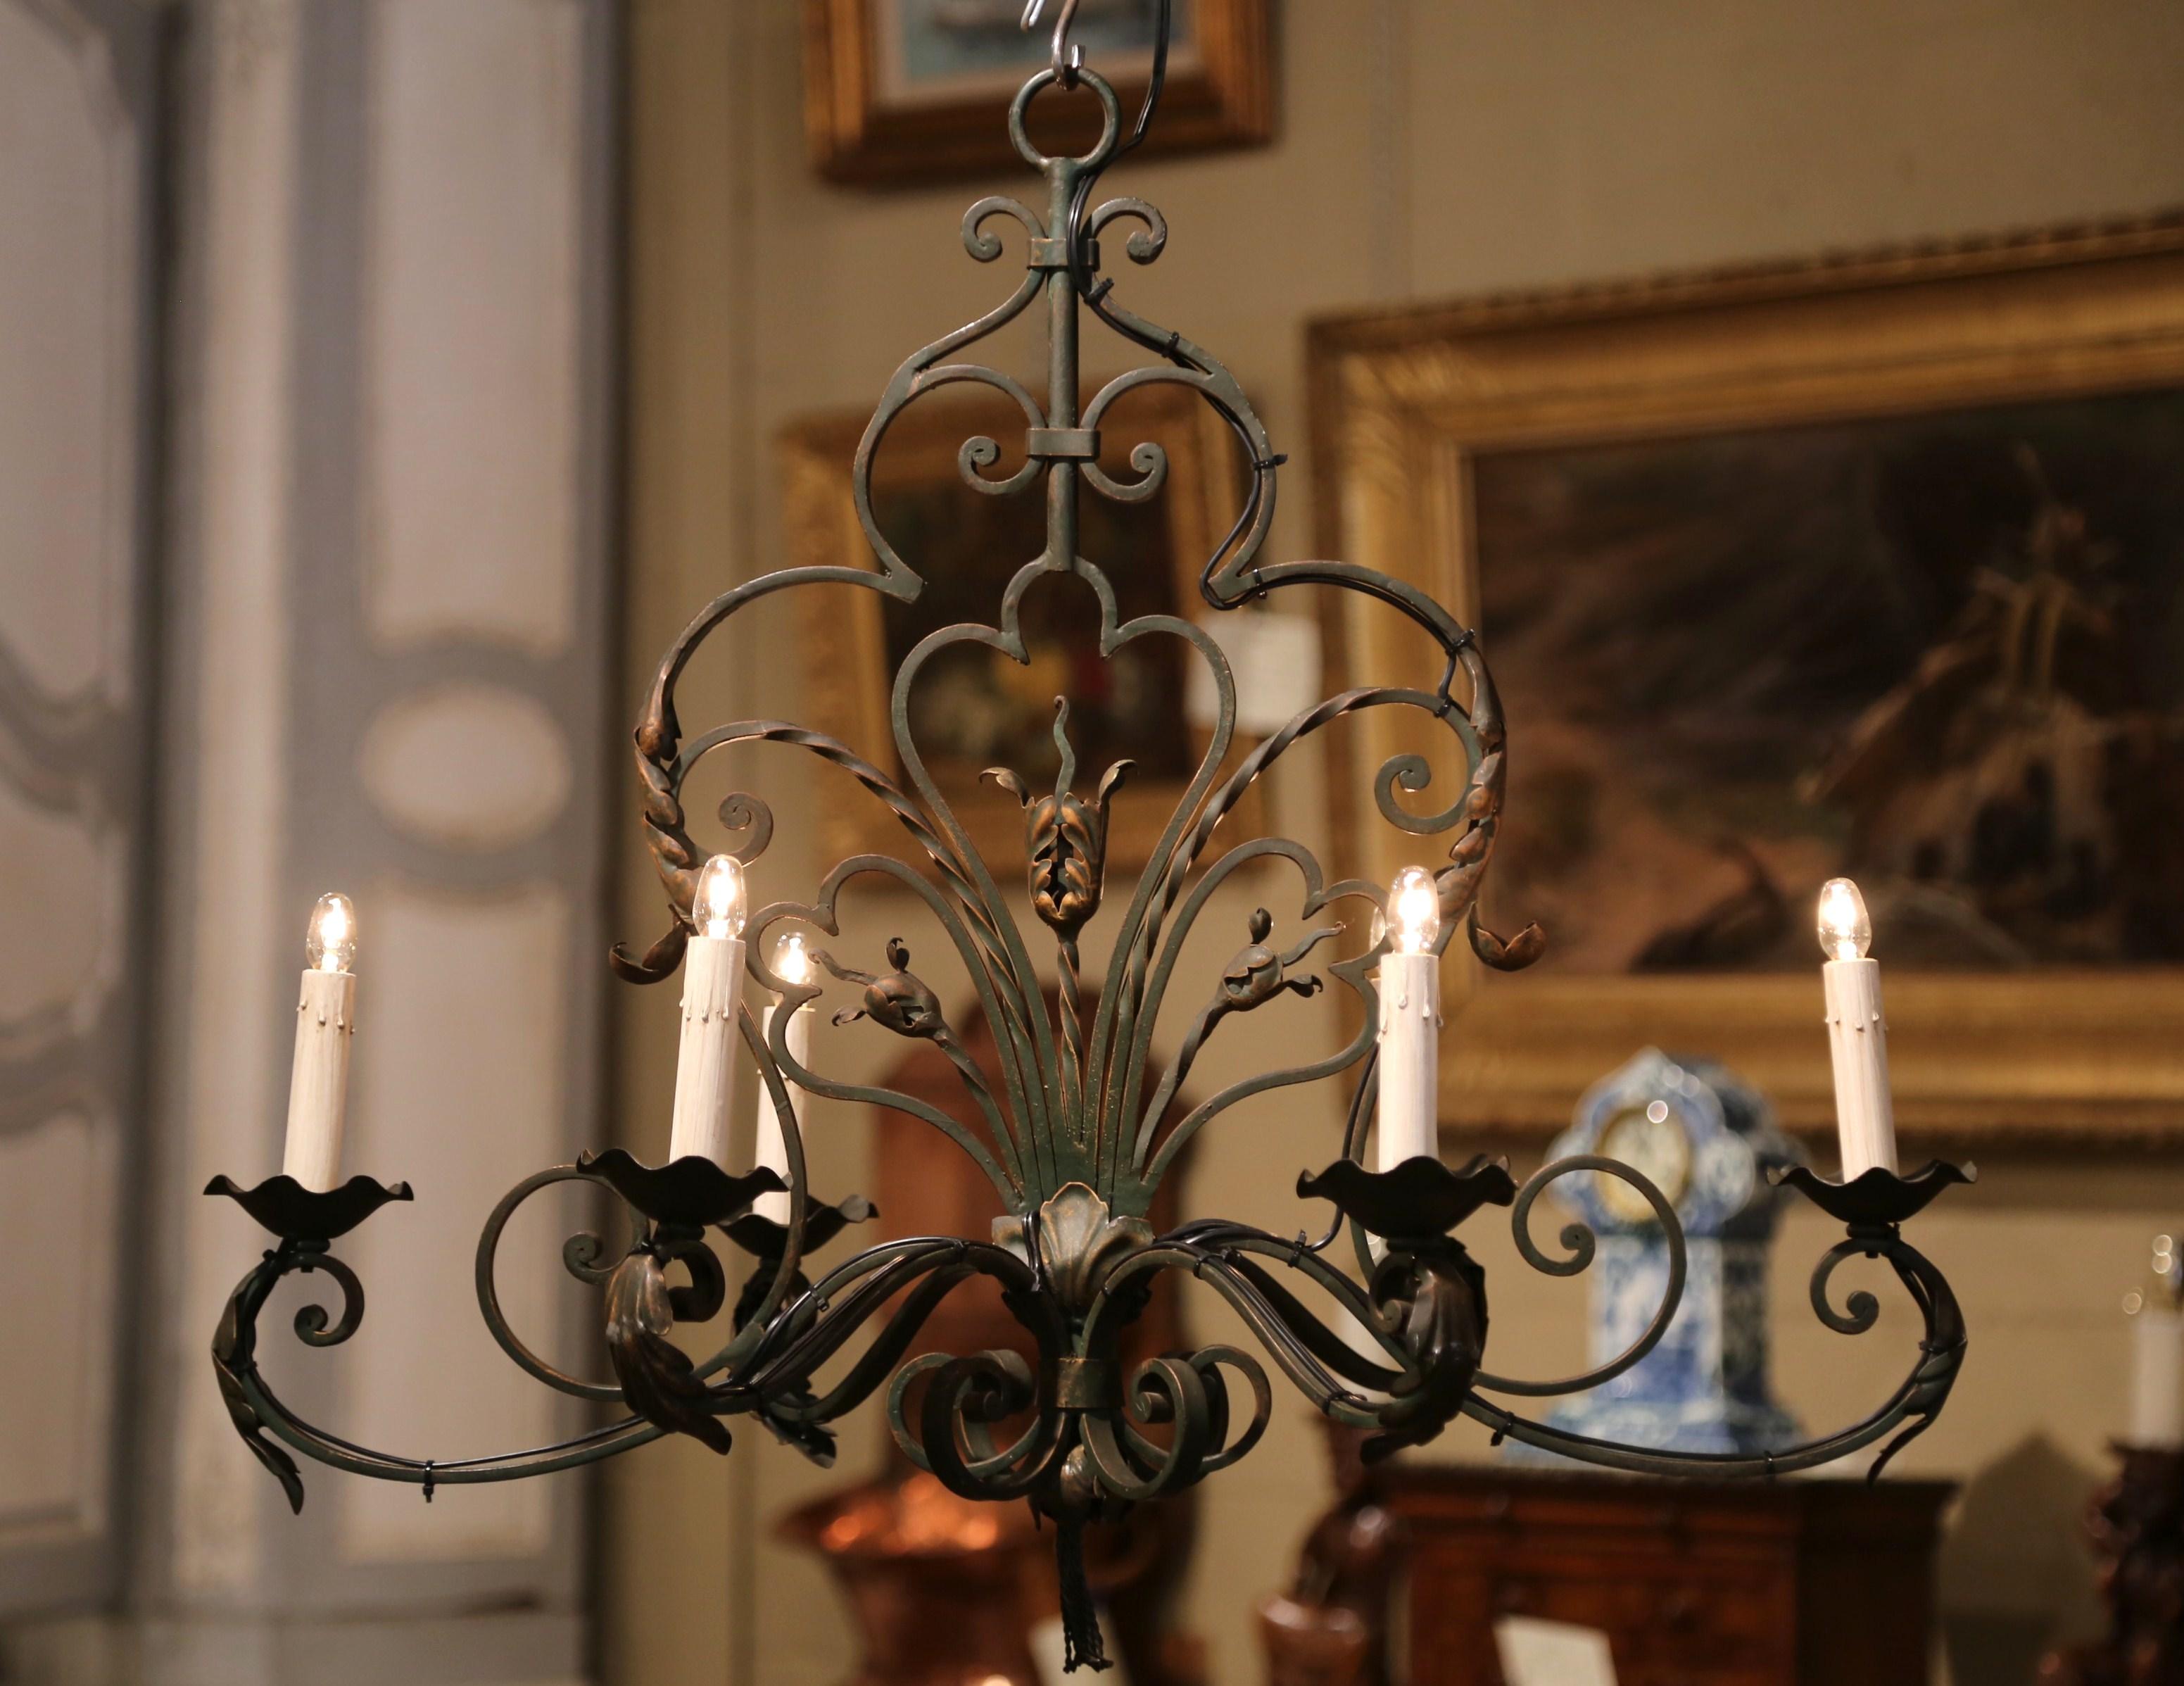 This elegant, scrolling, oblong chandelier would make a lovely addition to a breakfast or dining room. Crafted from iron, the chandelier was made in France, circa 1900. The large chandelier with metal flowers, acanthus leaves and scroll decor,